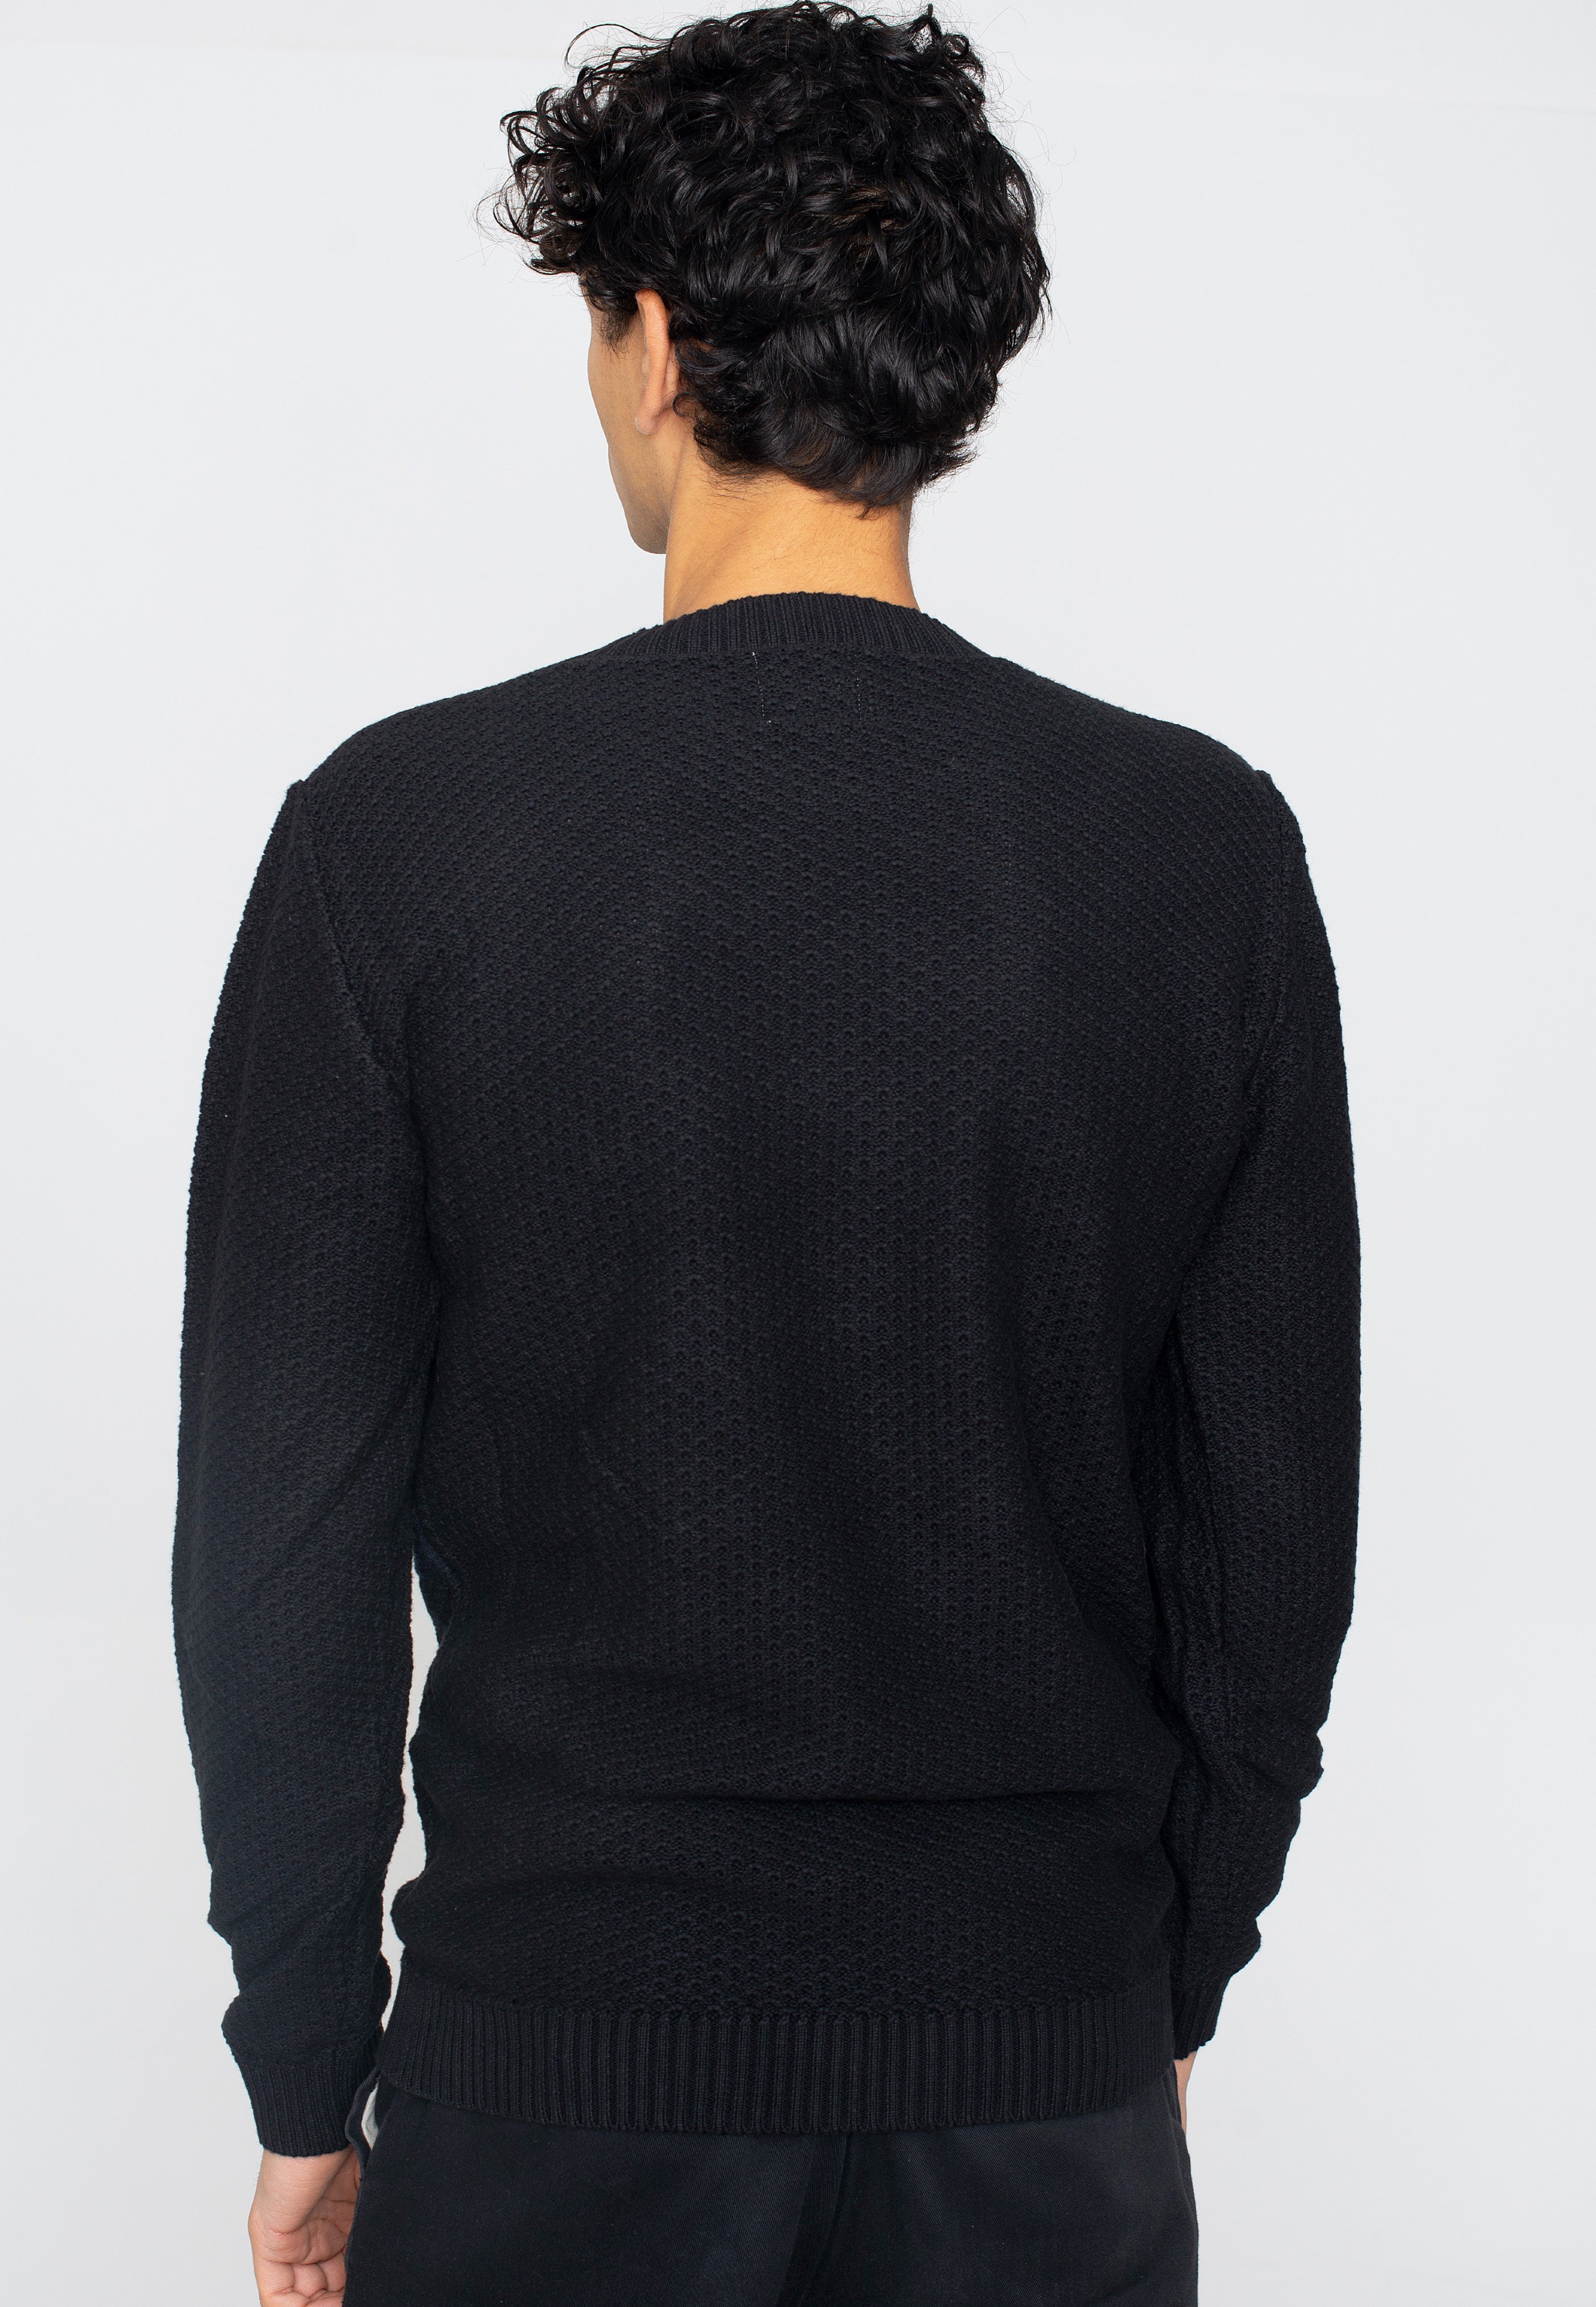 Ironnail - Angrist Knit - Pullover